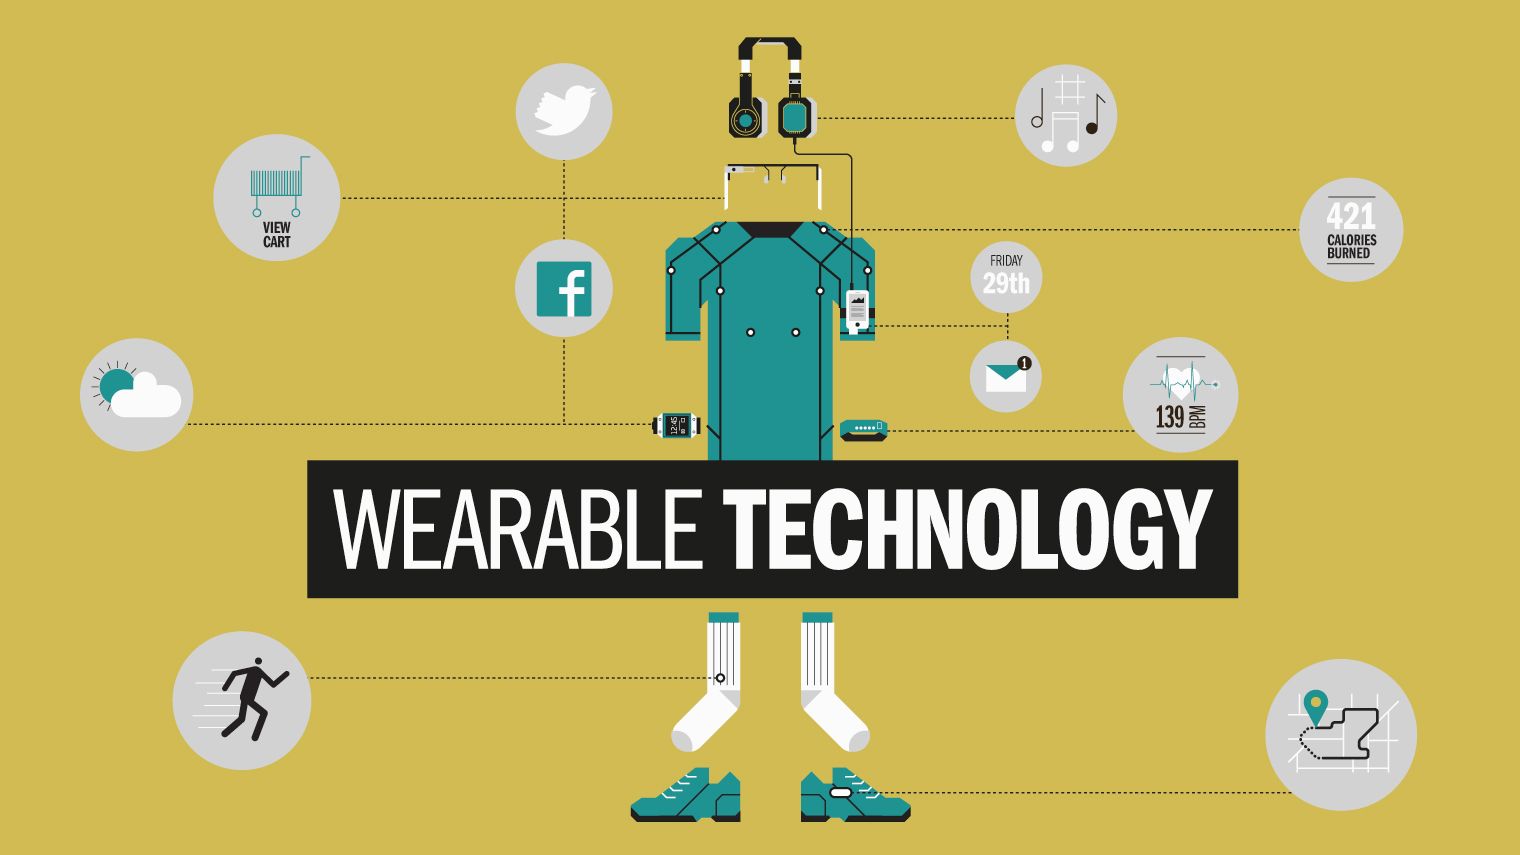 Wearable technology - market size, growth and advice